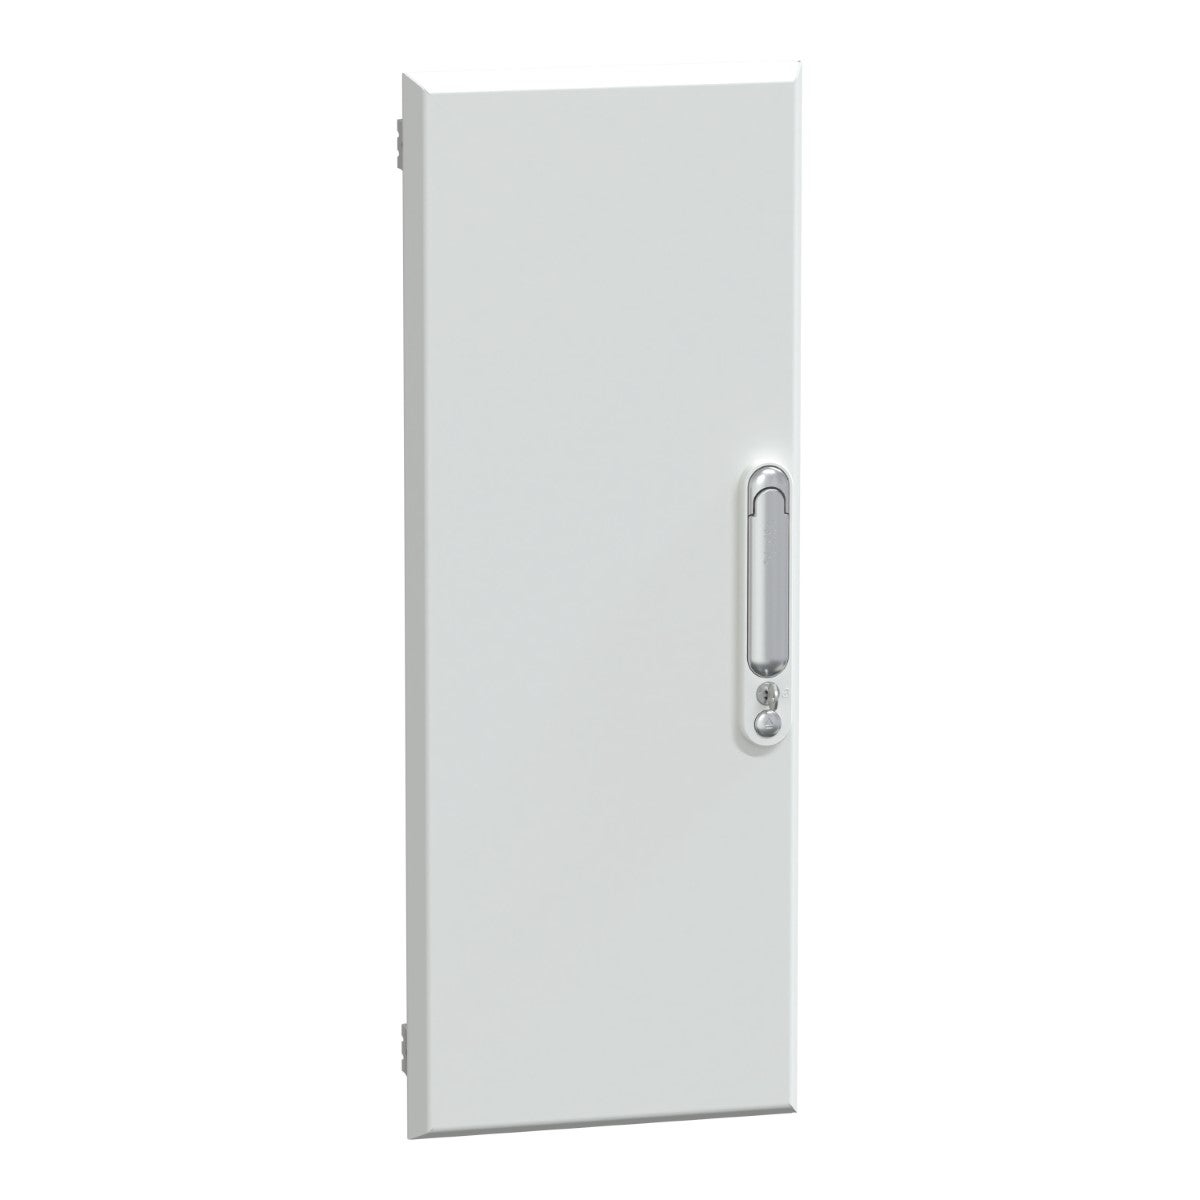 Door, PrismaSeT G, plain type for duct, 15M, W300, IP30, white, RAL 9003